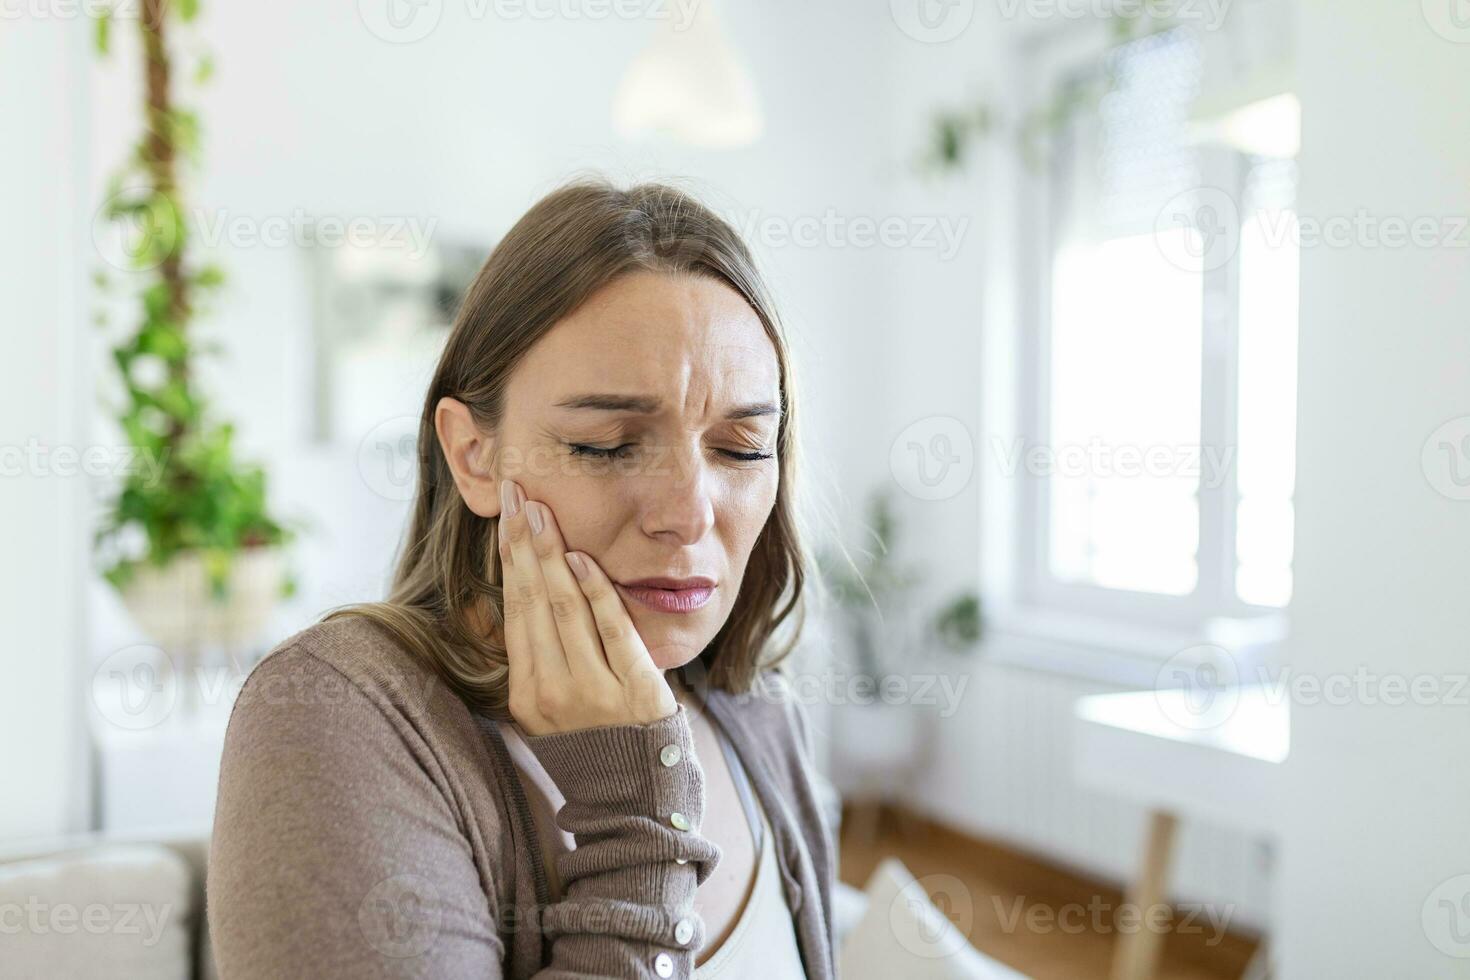 Tooth Pain And Dentistry. Young Woman Suffering From Terrible Strong Teeth Pain, Touching Cheek With Hand. Female Feeling Painful Toothache. Dental Care And Health Concept. photo